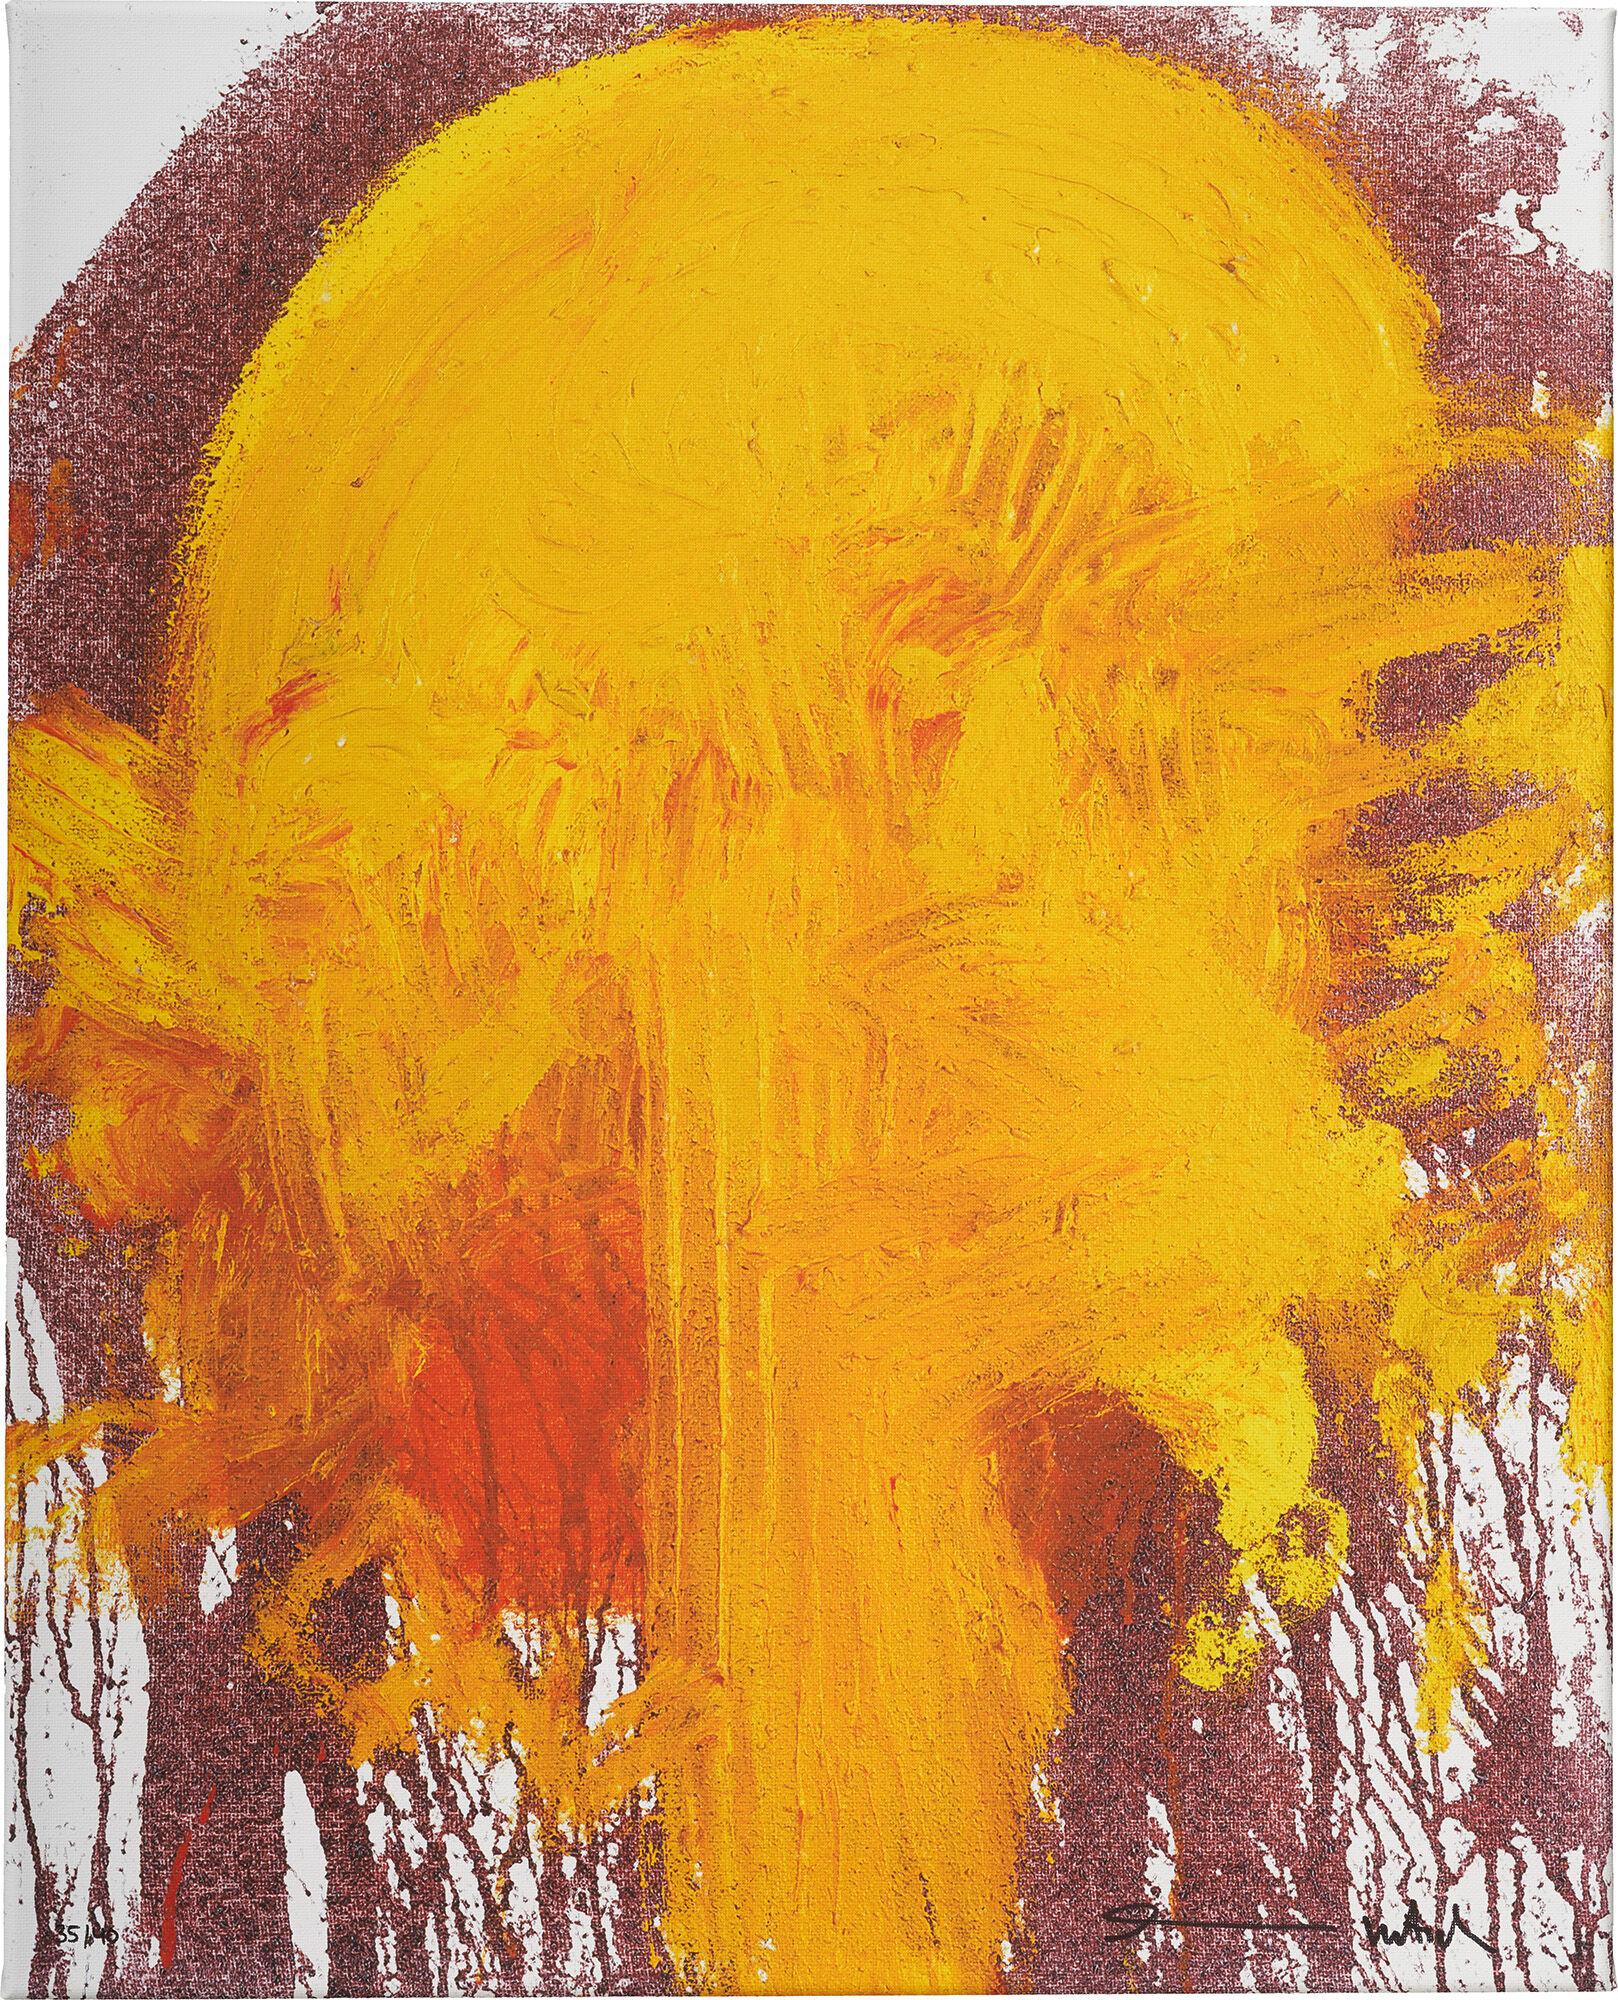 Picture "Poured Picture Yellow" (2014) by Hermann Nitsch